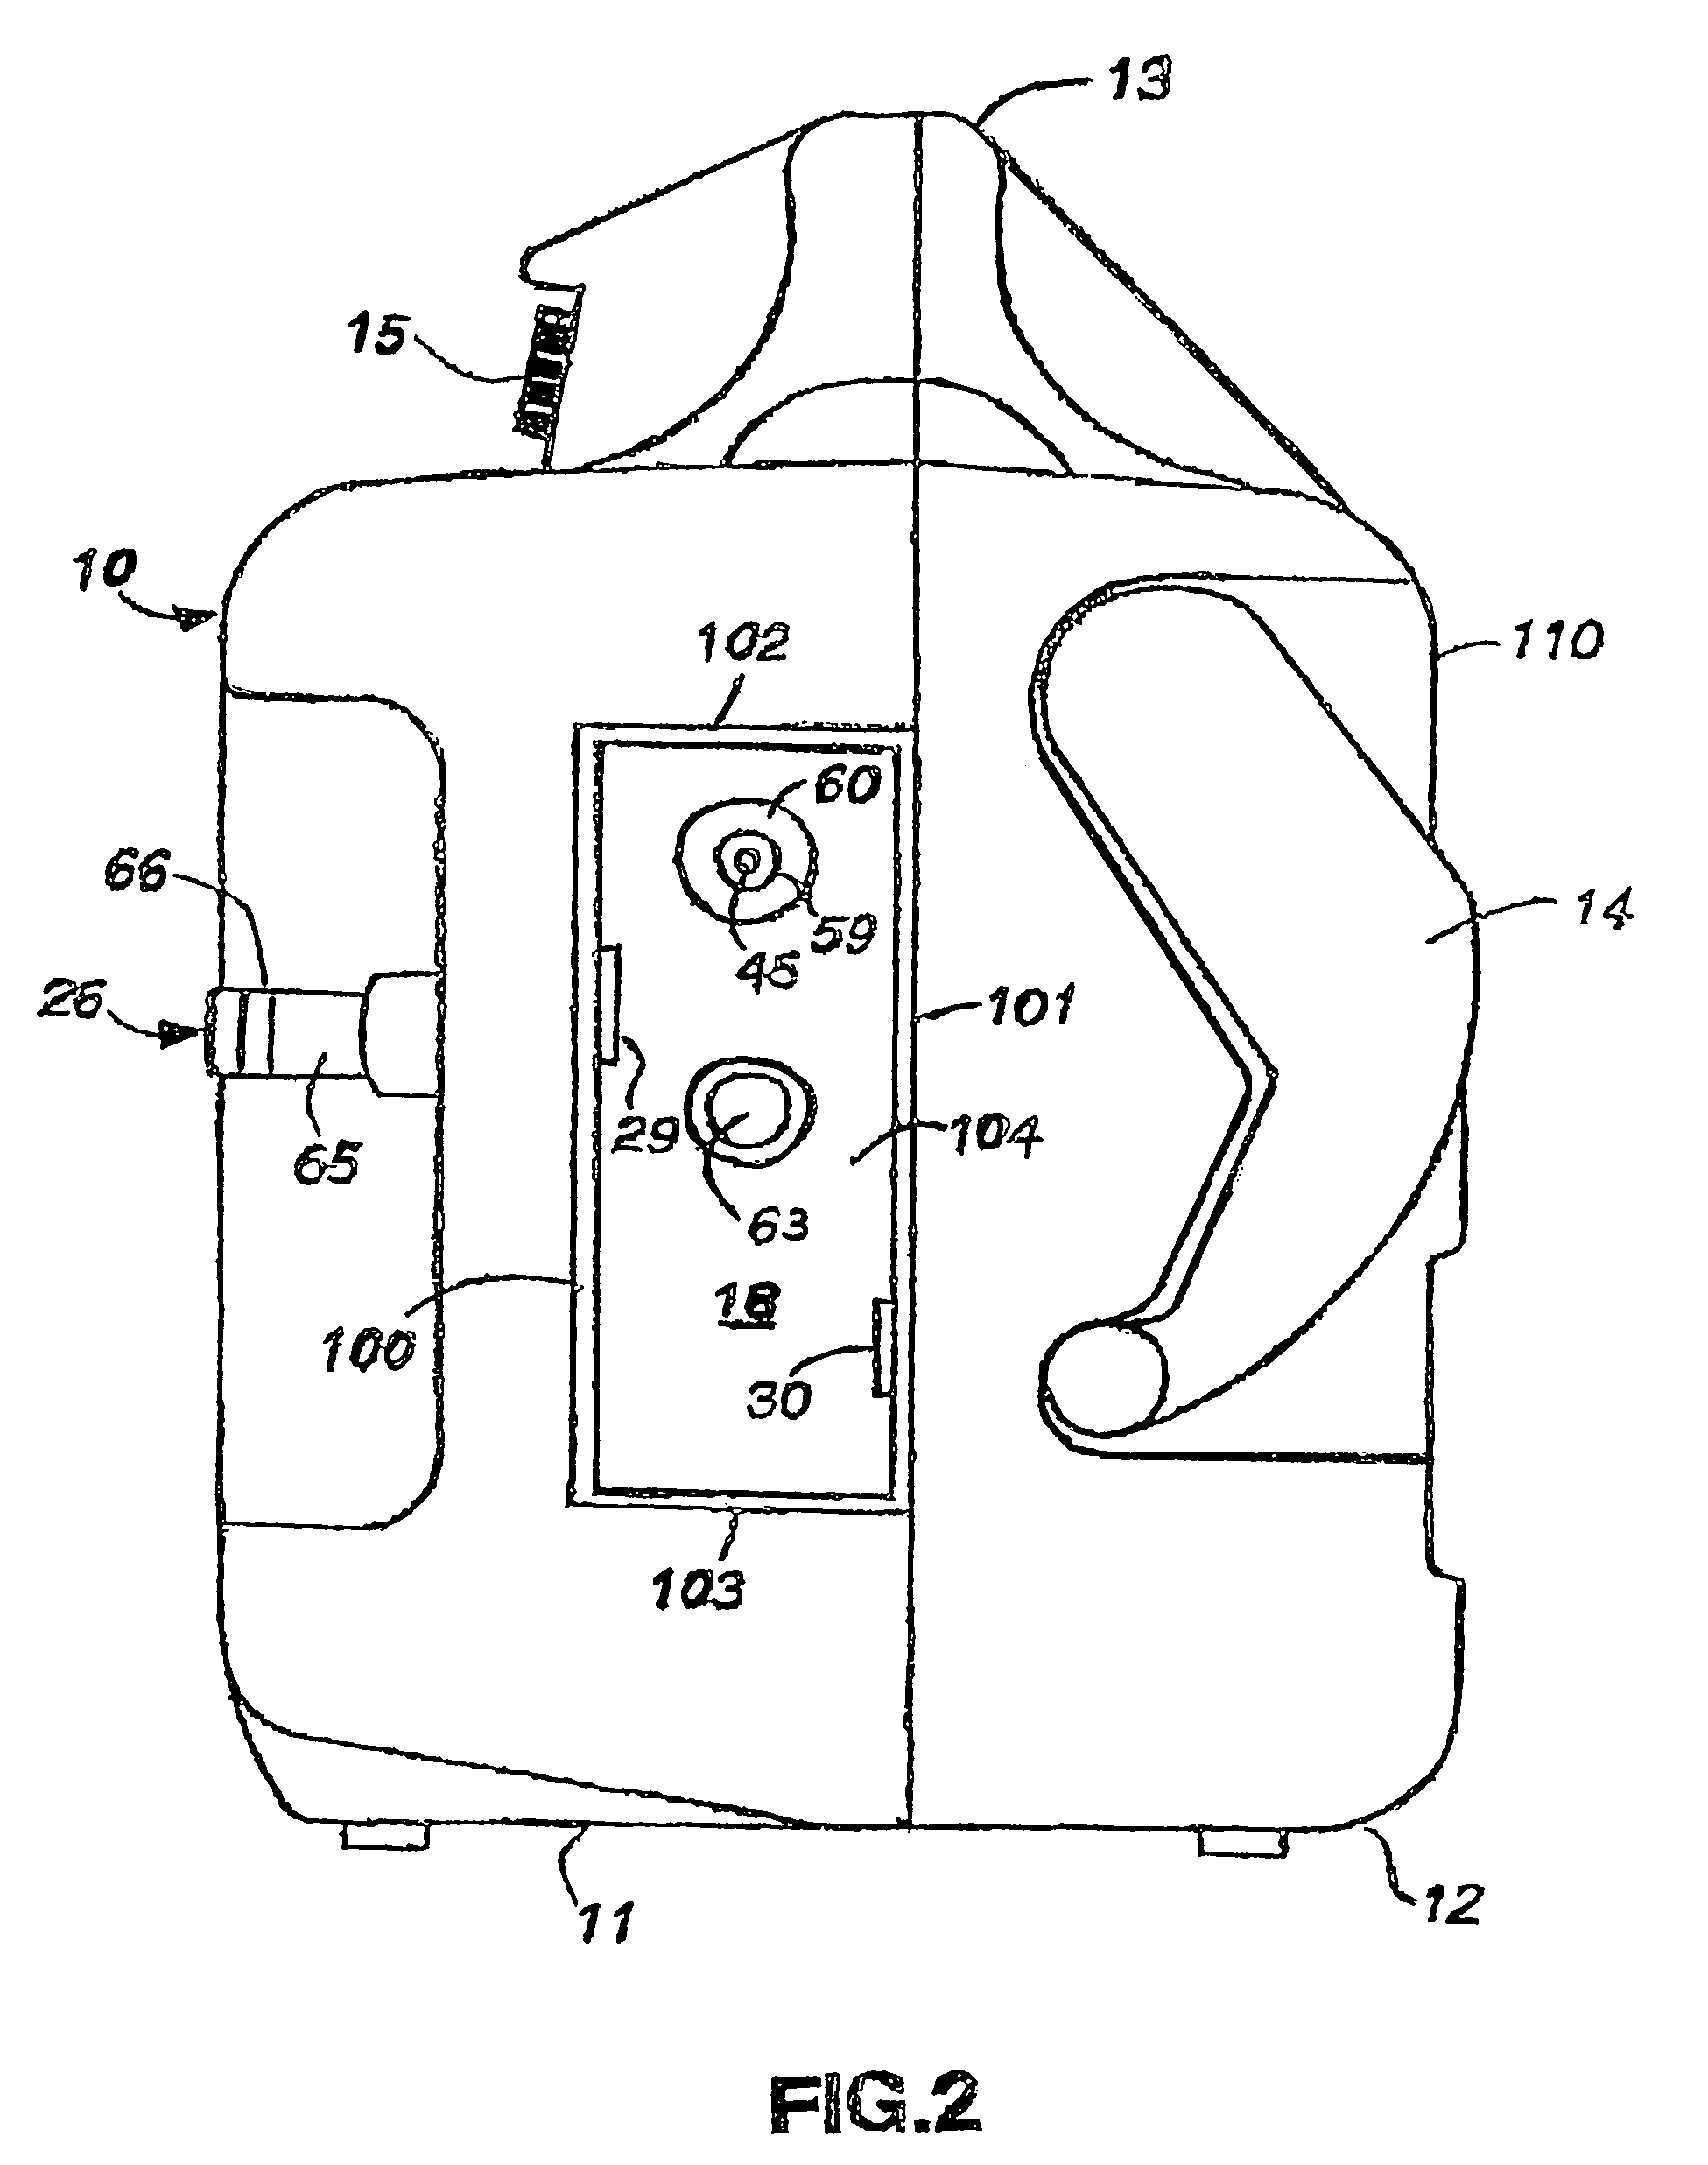 Wound therapy device and related methods